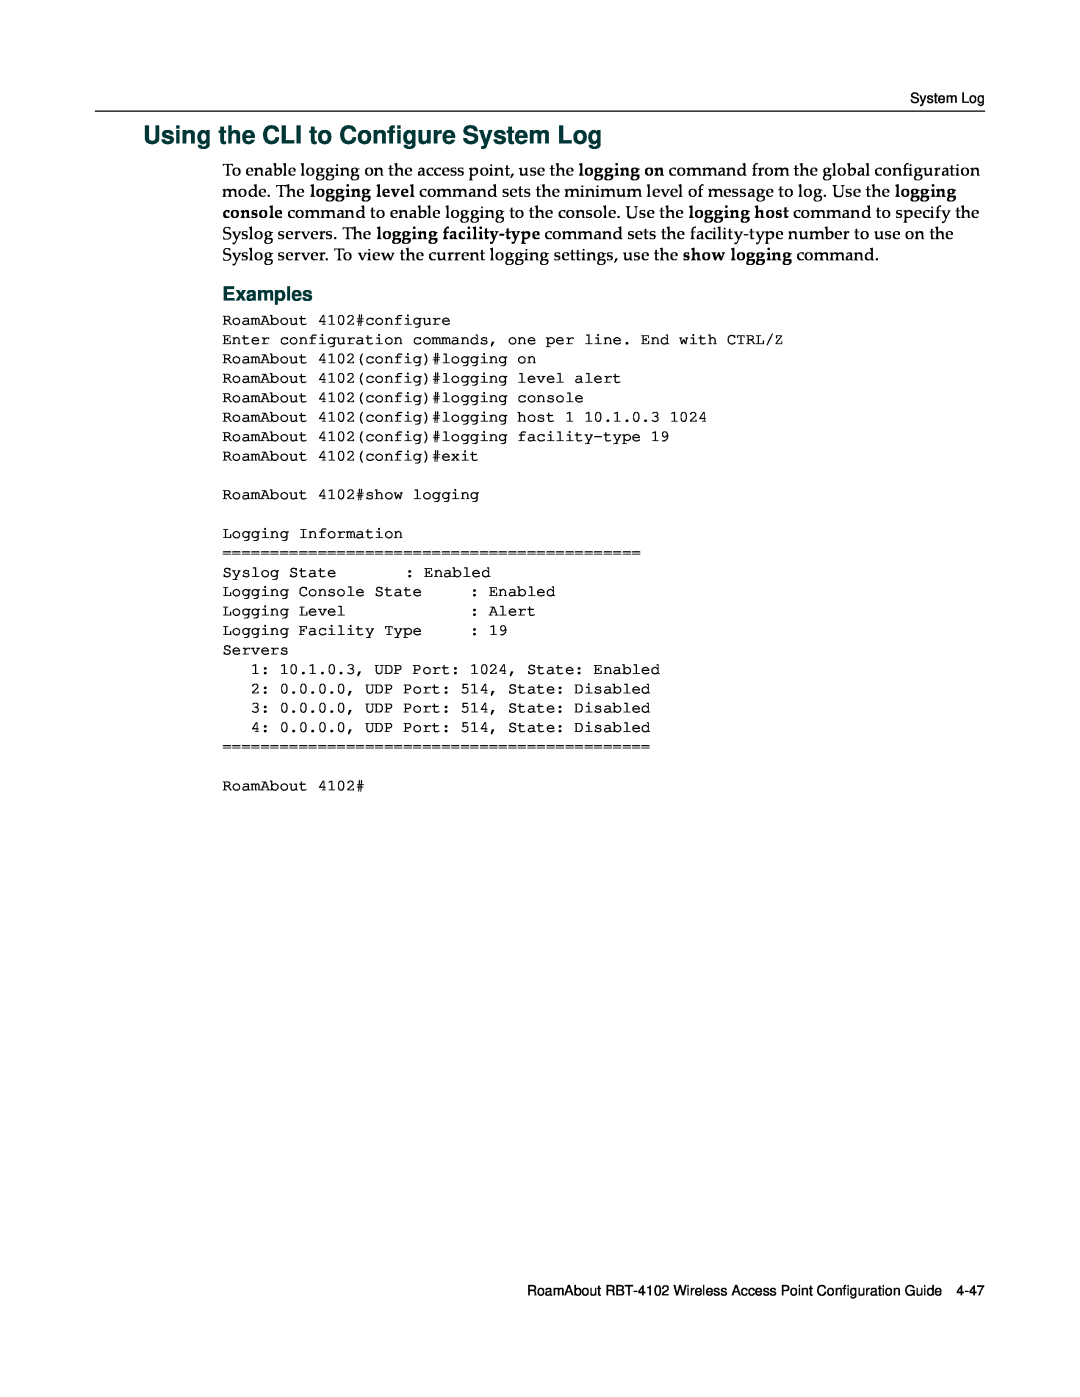 Enterasys Networks RBT-4102 manual Using the CLI to Configure System Log, Examples 